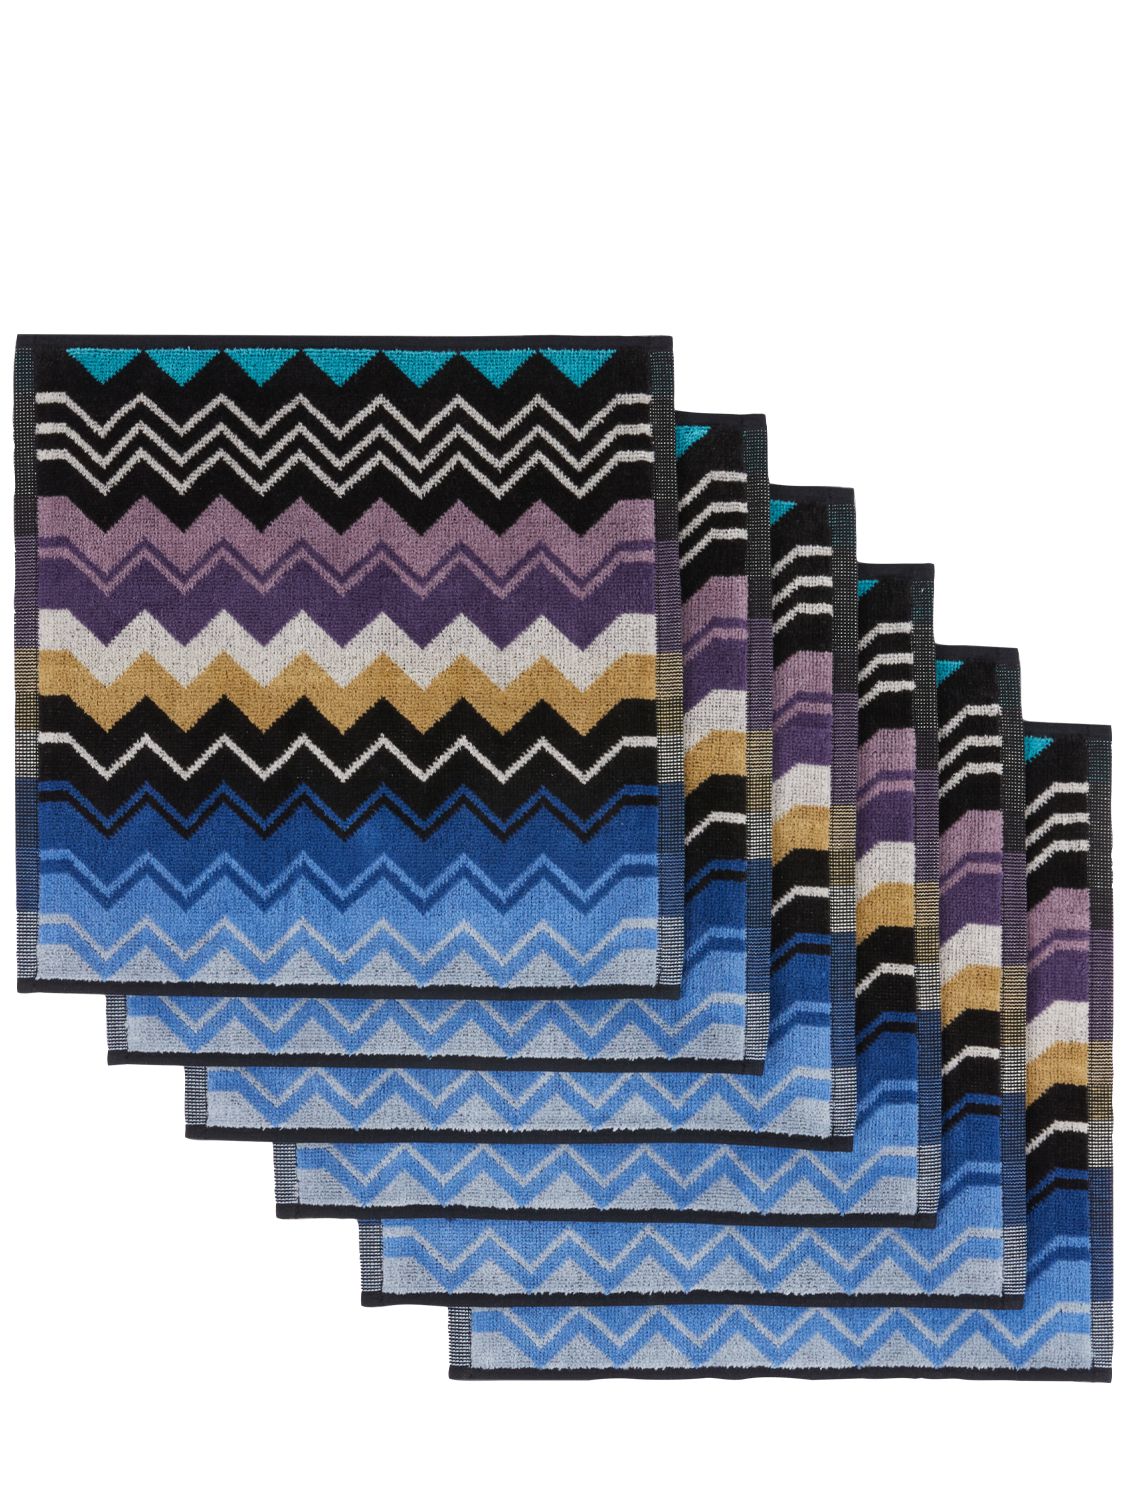 Missoni Giacomo Set Of 6 Cotton Hand Towels In Multi